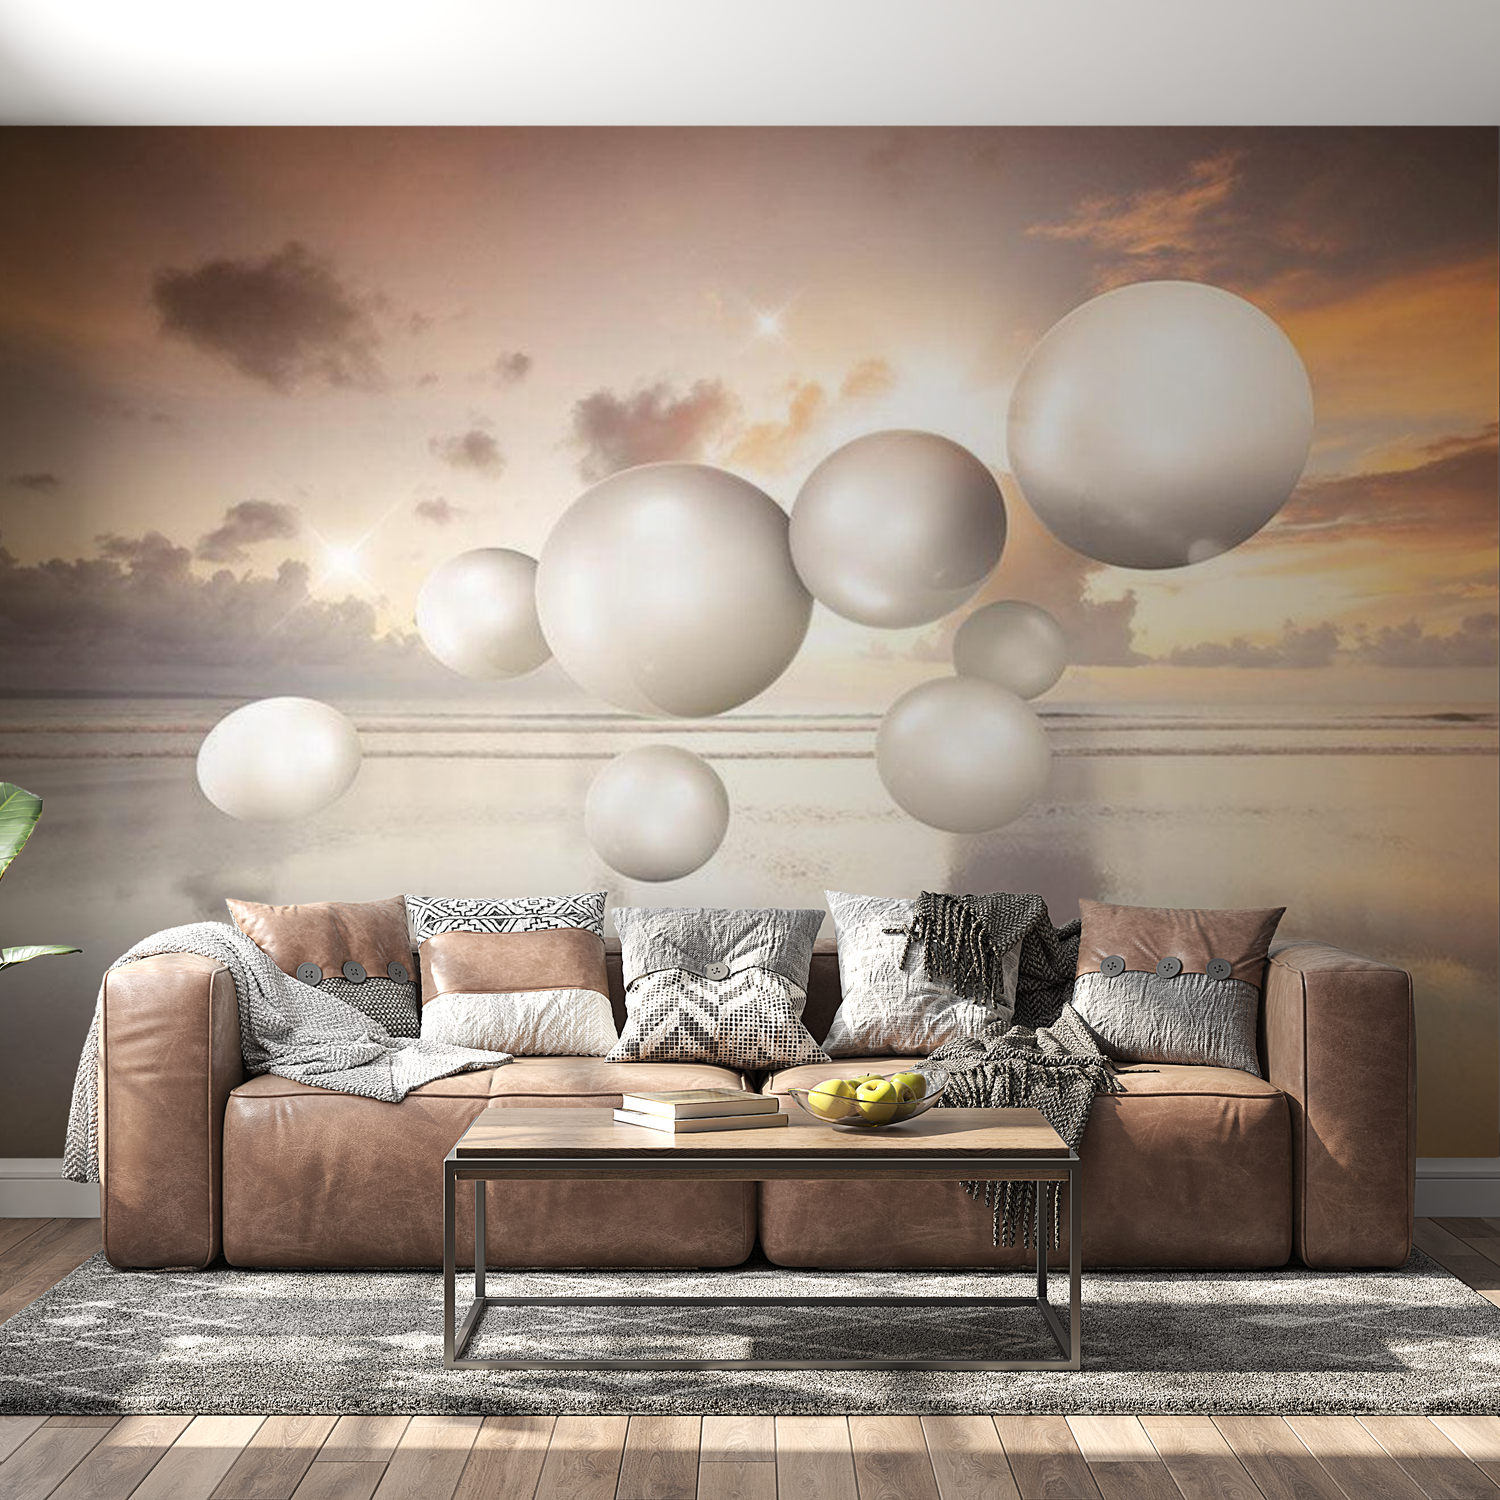 3D Illusion Wallpaper Wall Mural - Morning Jewels 39"Wx27"H